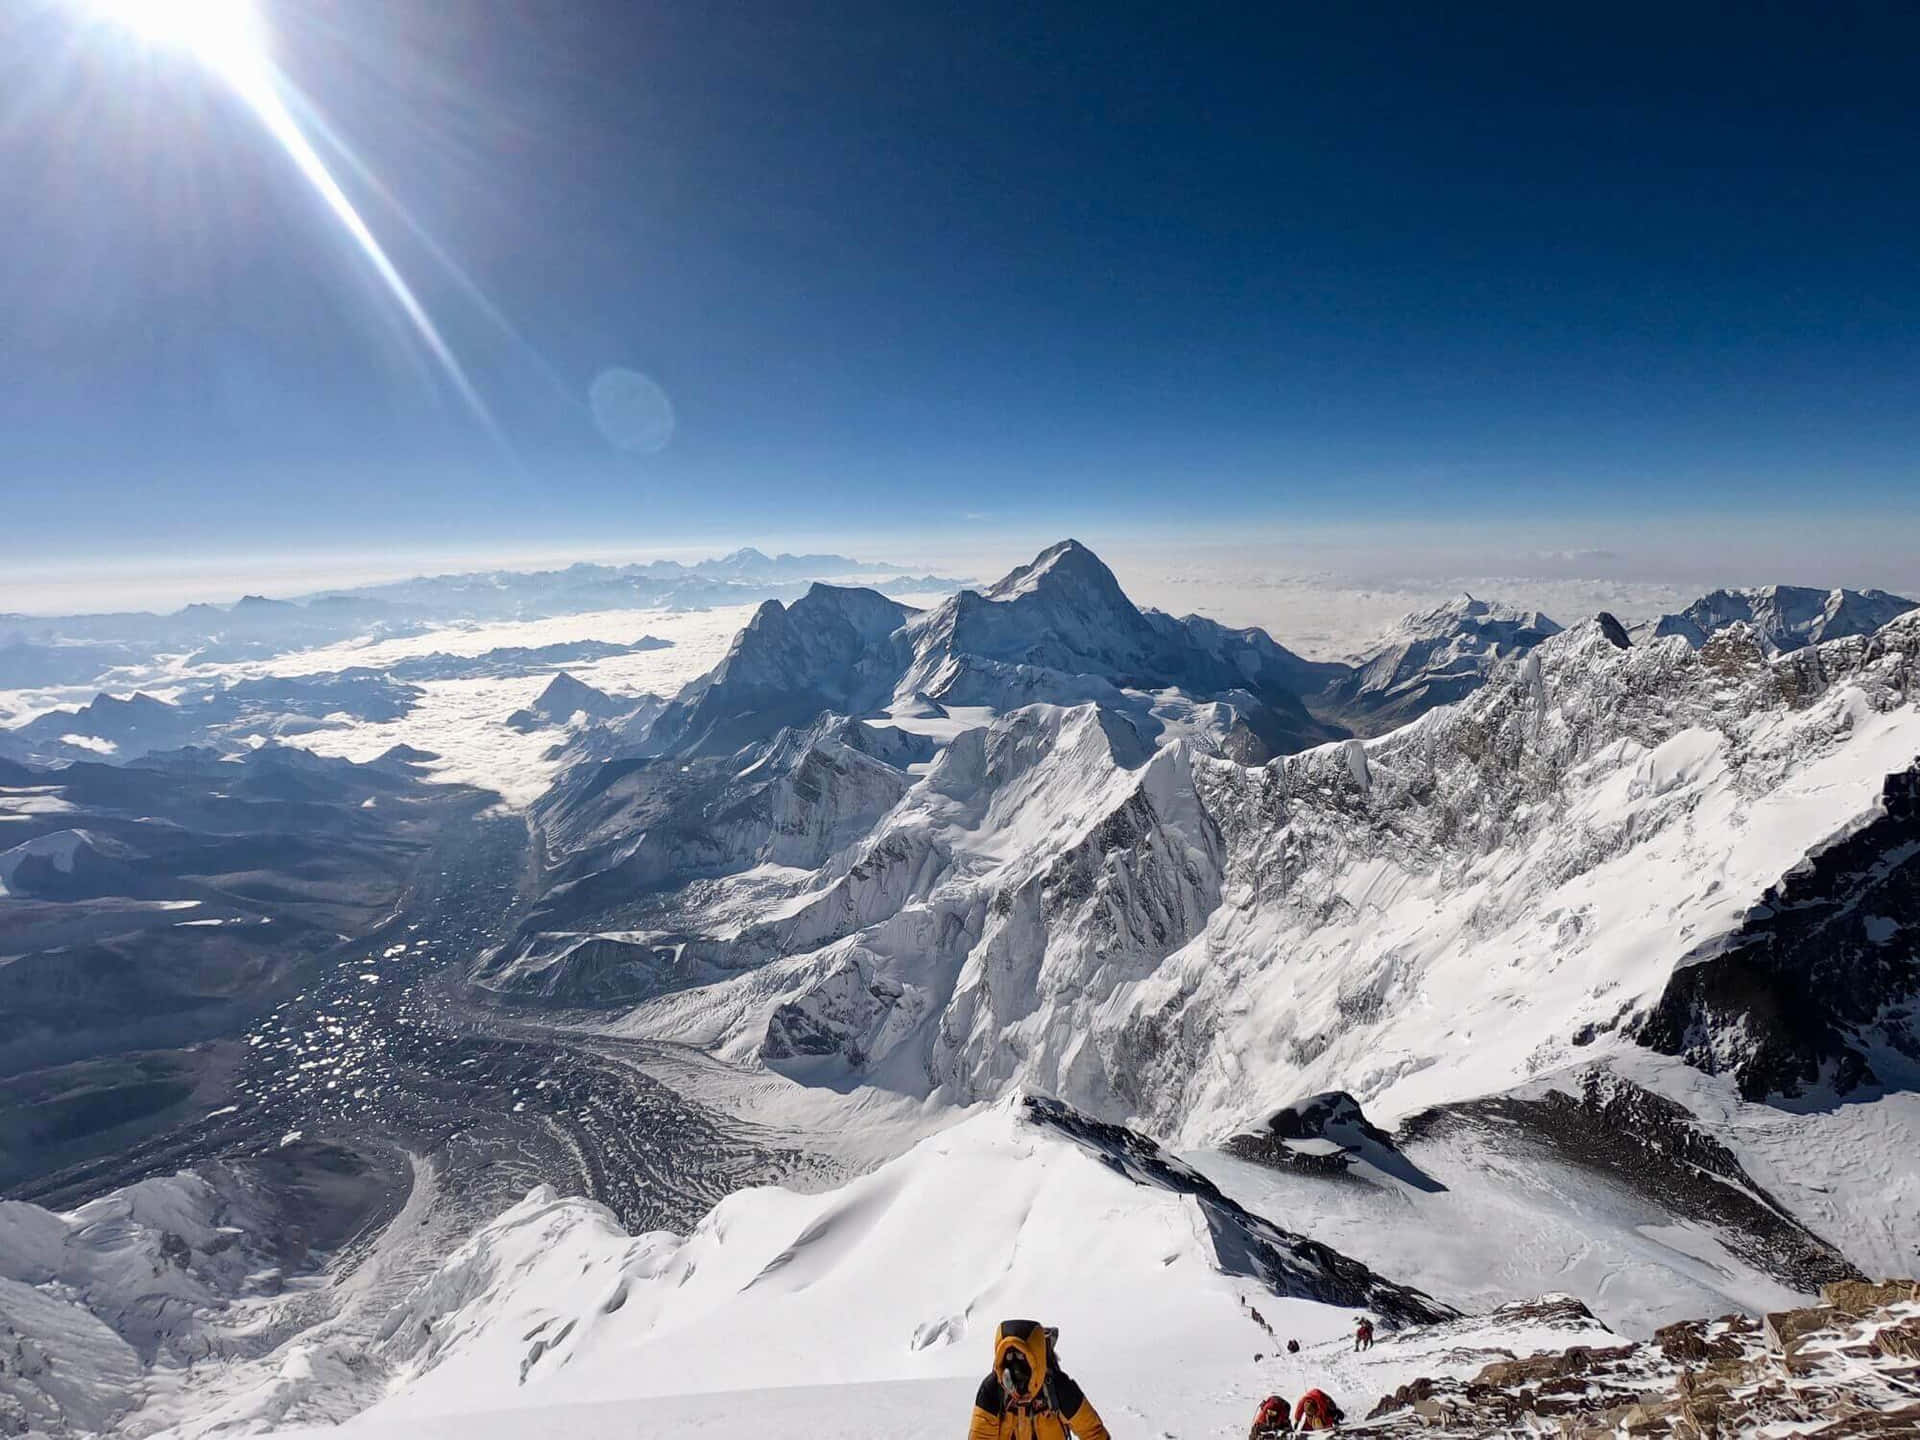 The Majestic View of Mount Everest